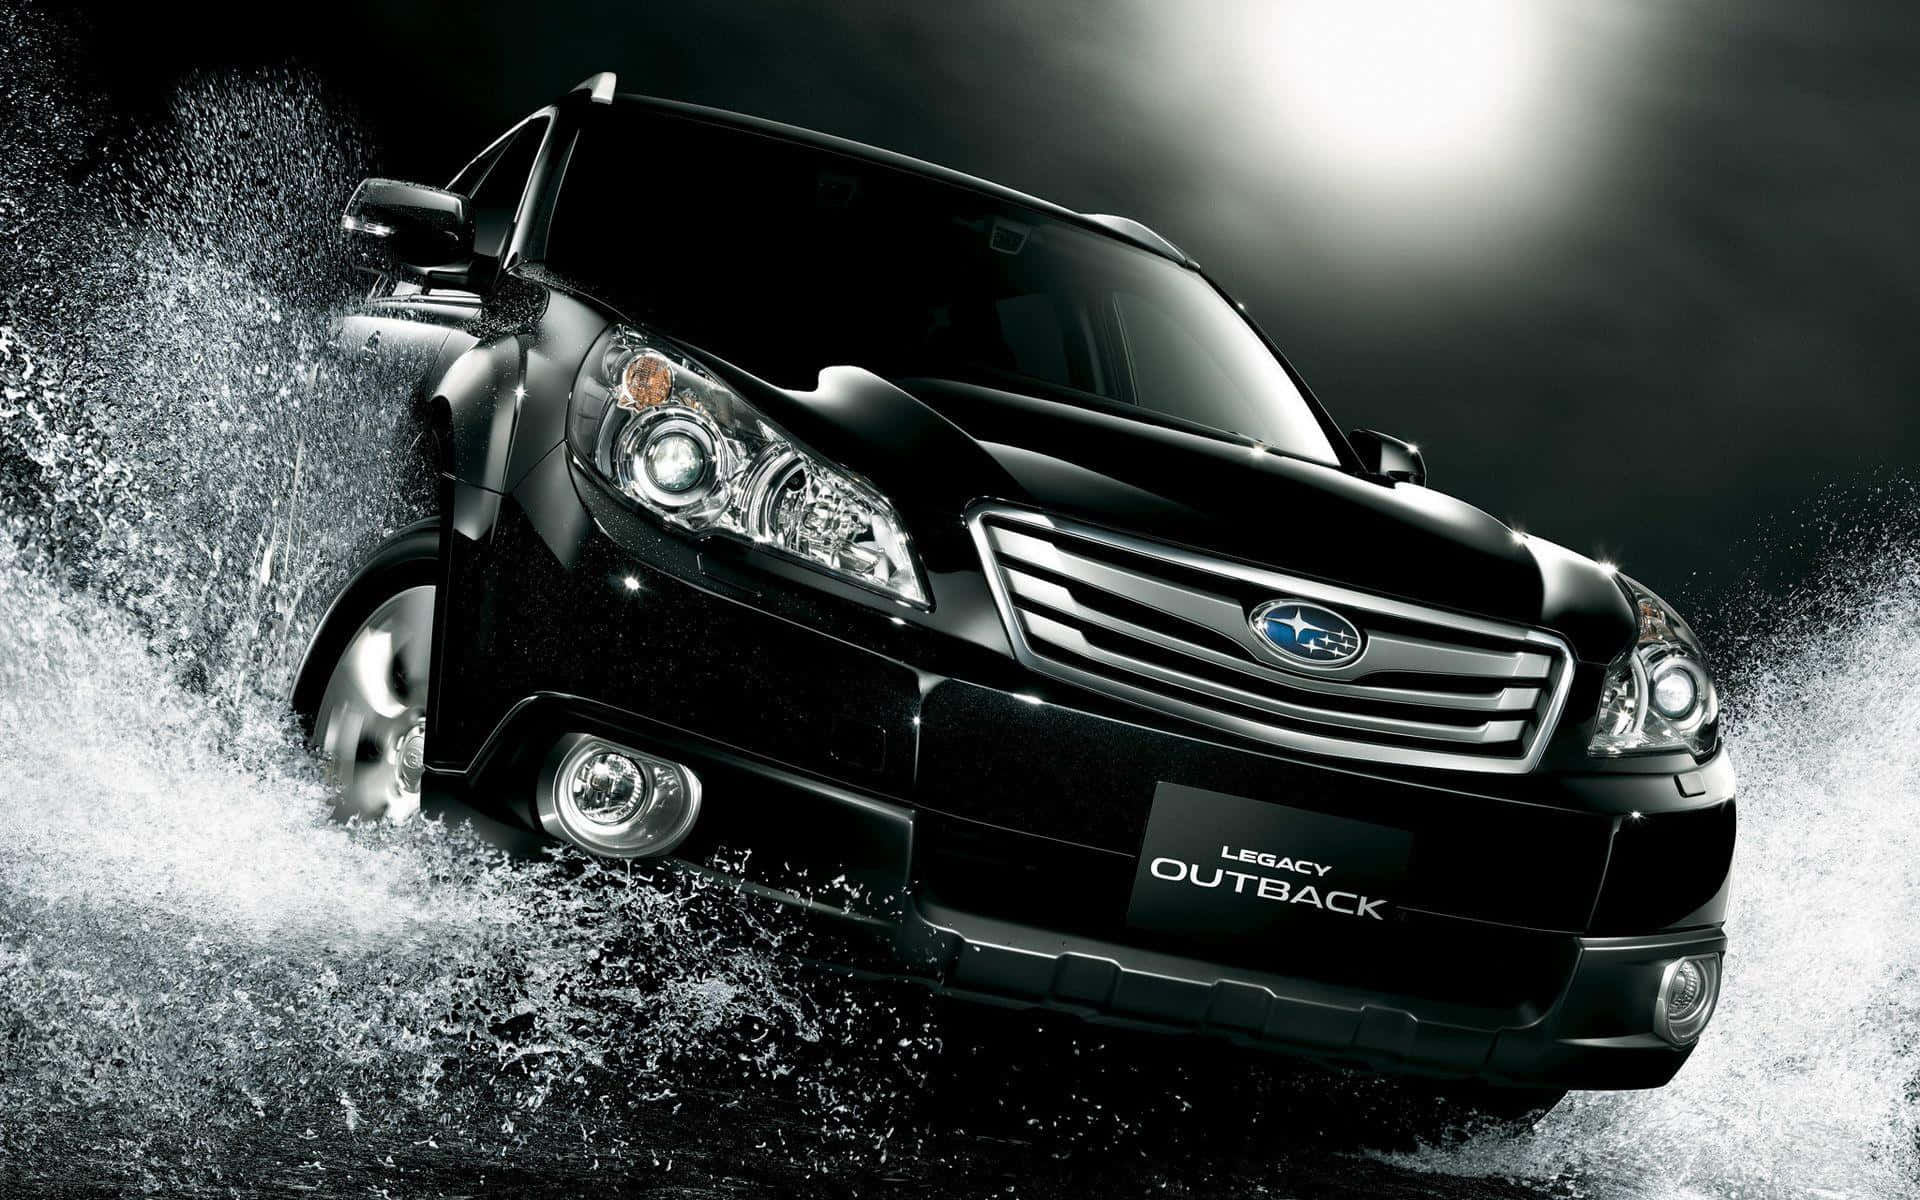 Off-road Adventure With Subaru Outback Wallpaper